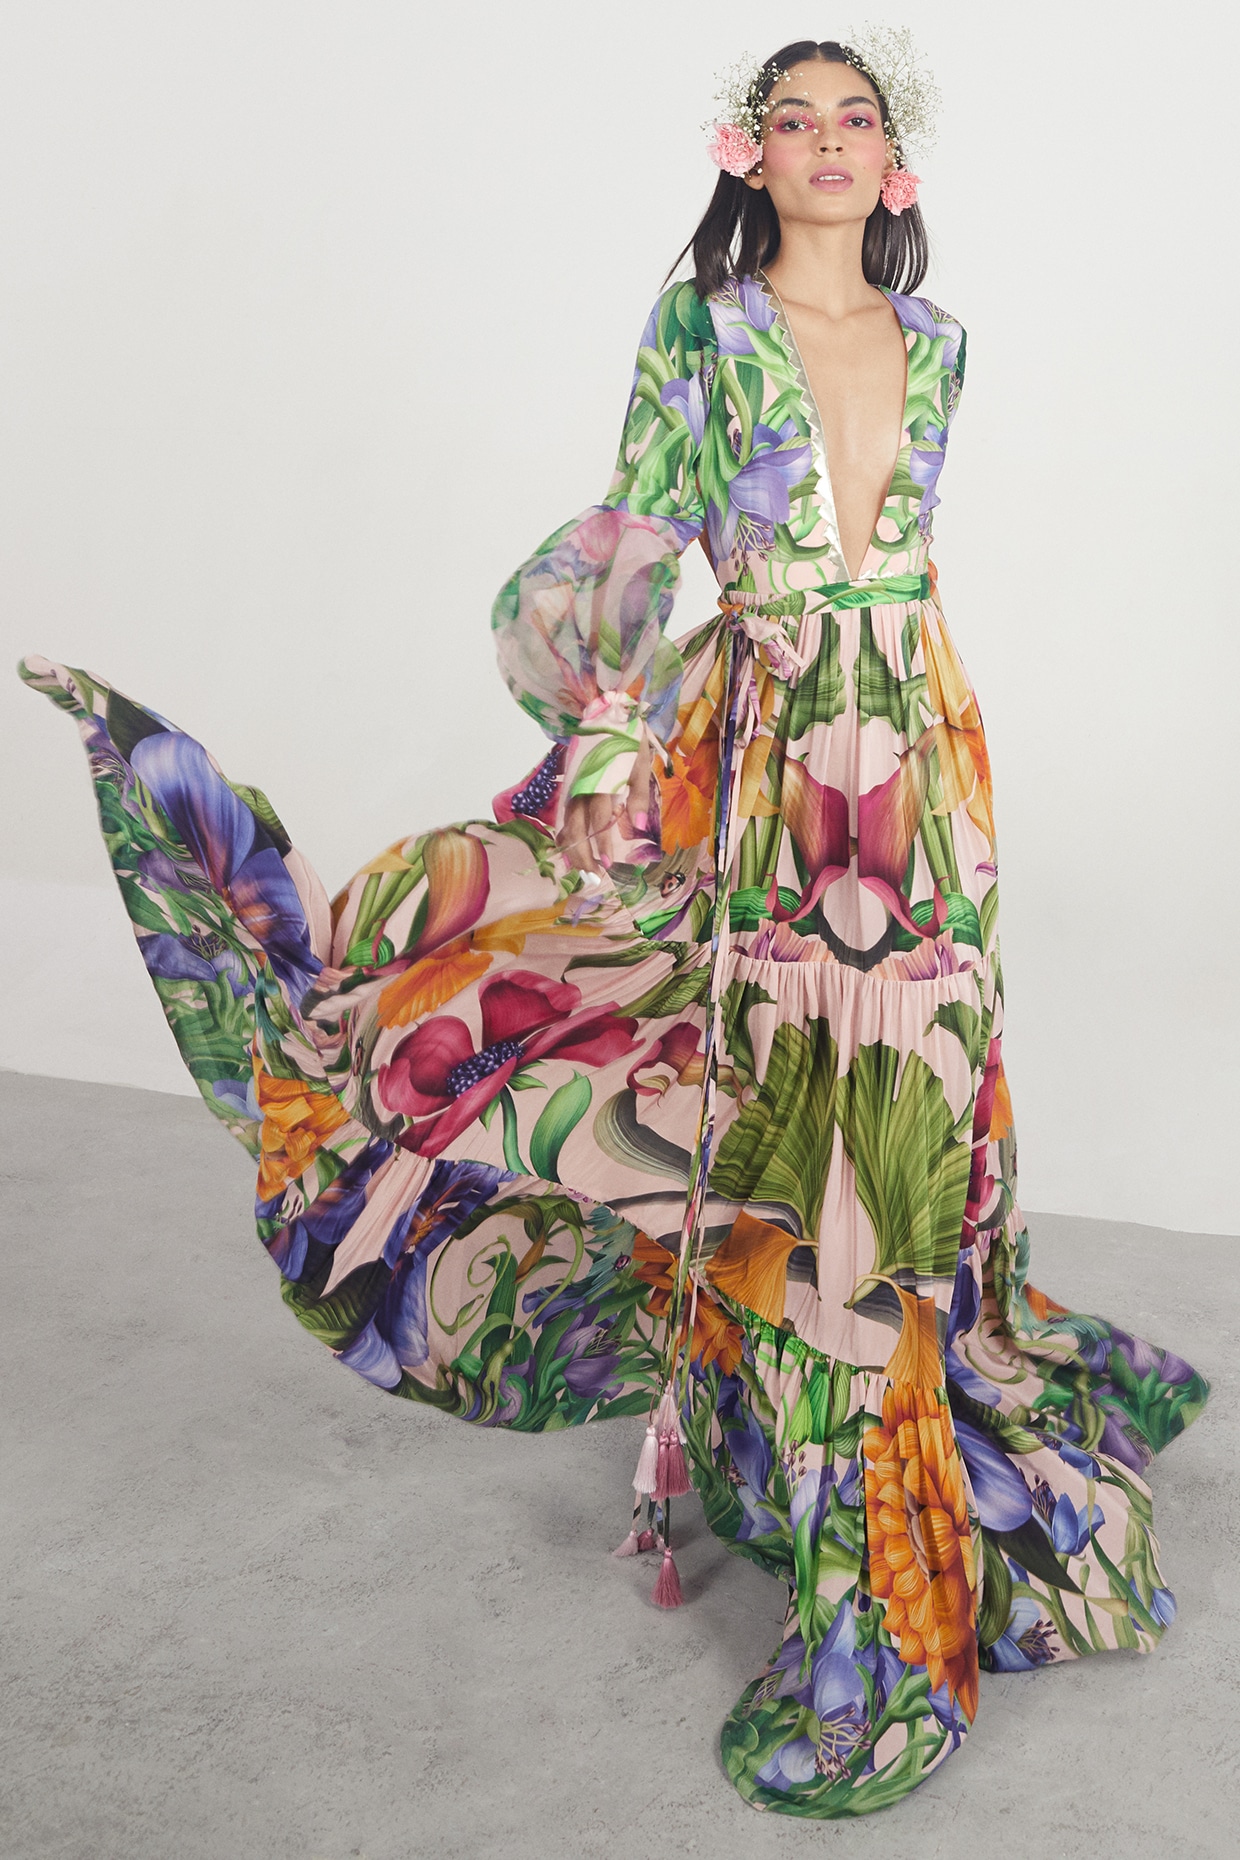 Designer Floral Tiered Maxi Dress For Women Runway Style With Long Sleeves,  Printed Ruffles, And Tiered Detailing Perfect For Parties And Proms From  Xbeauty, $66.81 | DHgate.Com